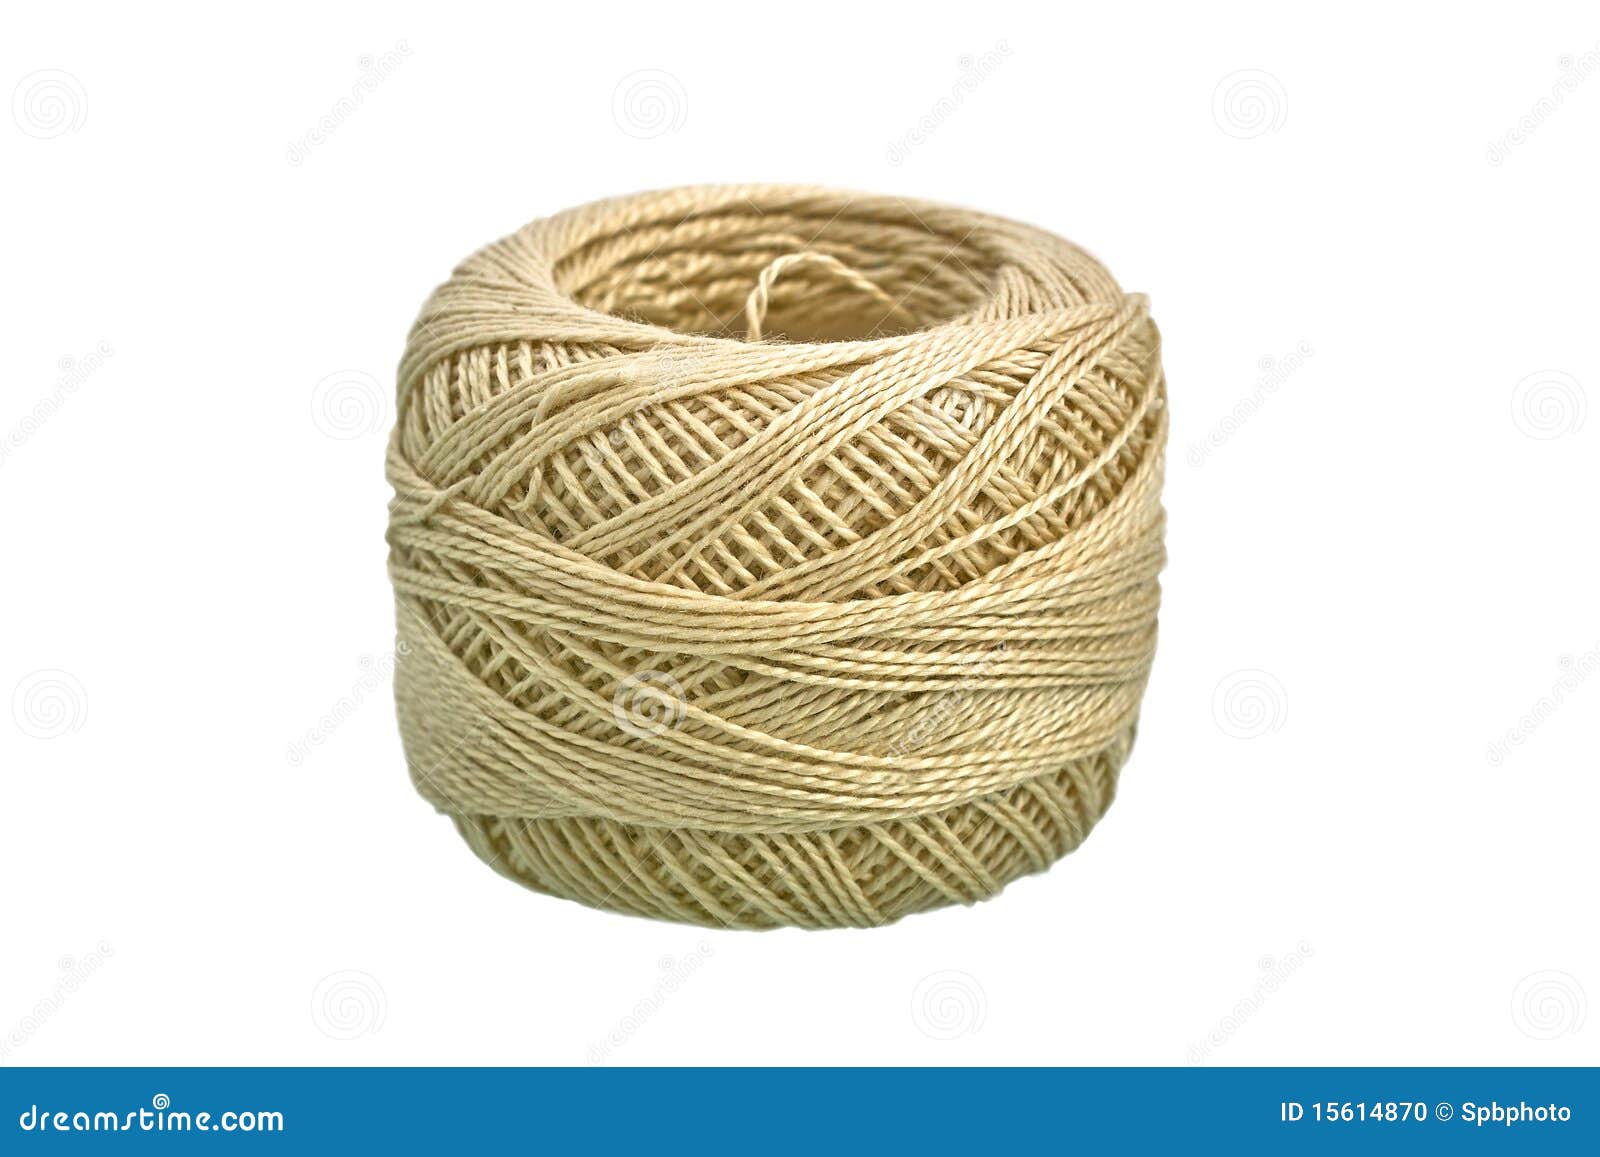 Beige cotton yarn stock photo. Image of cord, abstract - 15614870